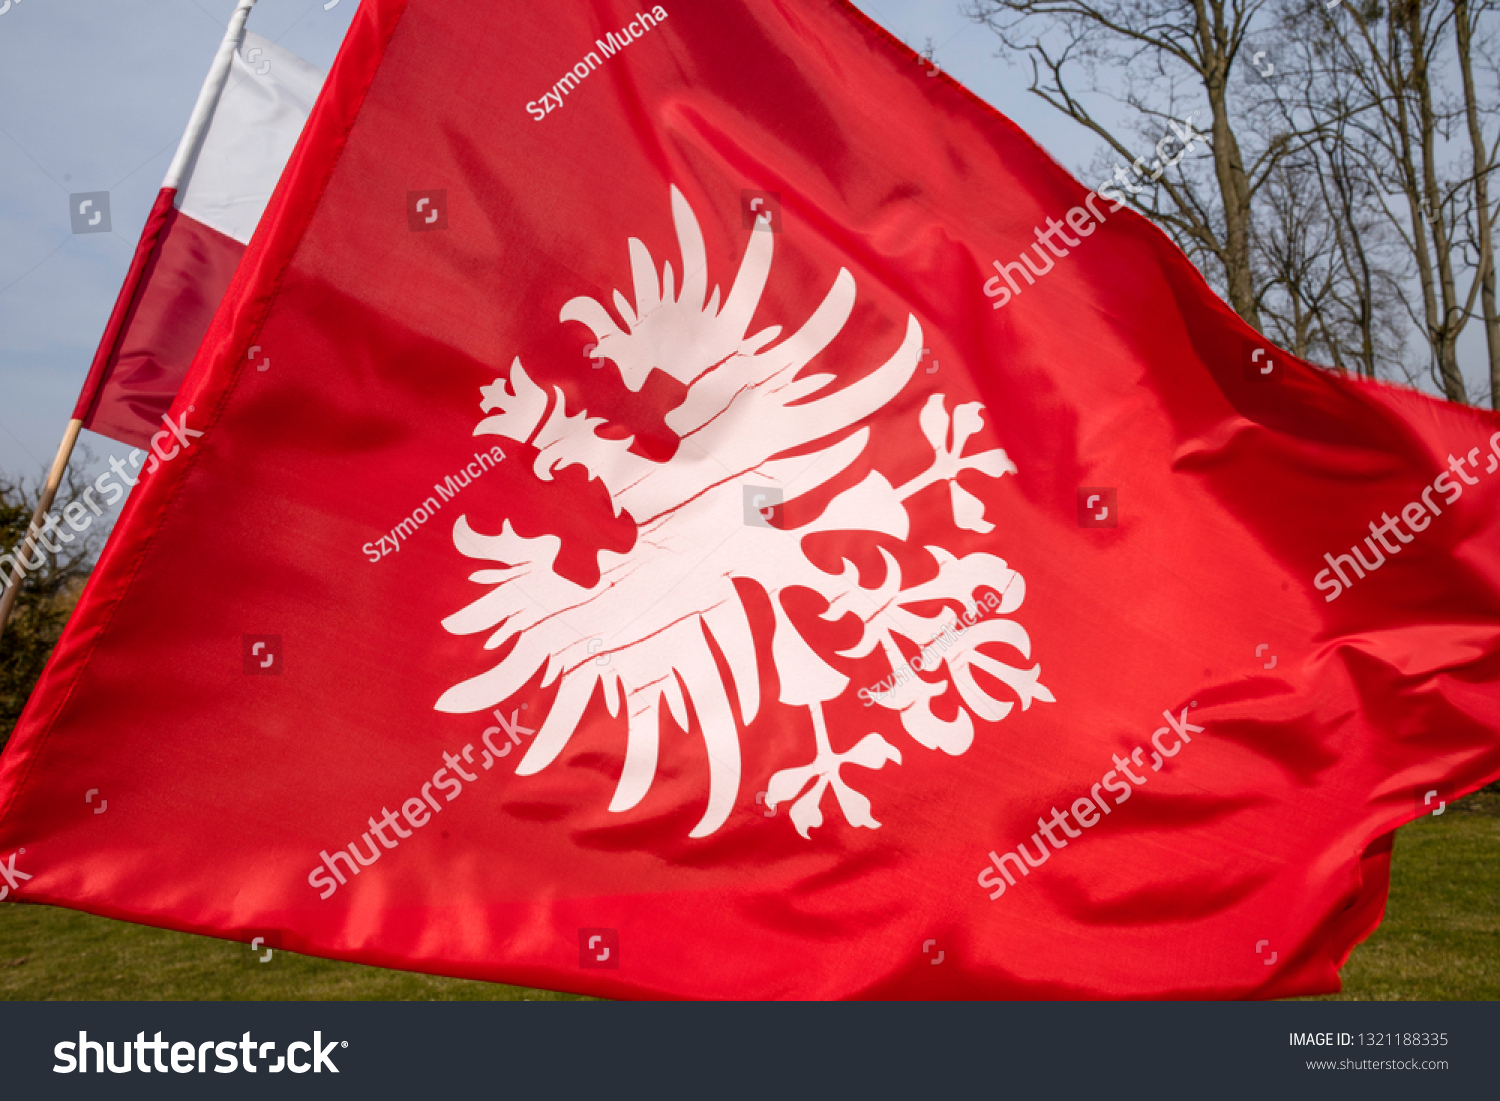 White eagle on red background - flag and emblem of the Greater Poland uprising, polish national colours. #1321188335